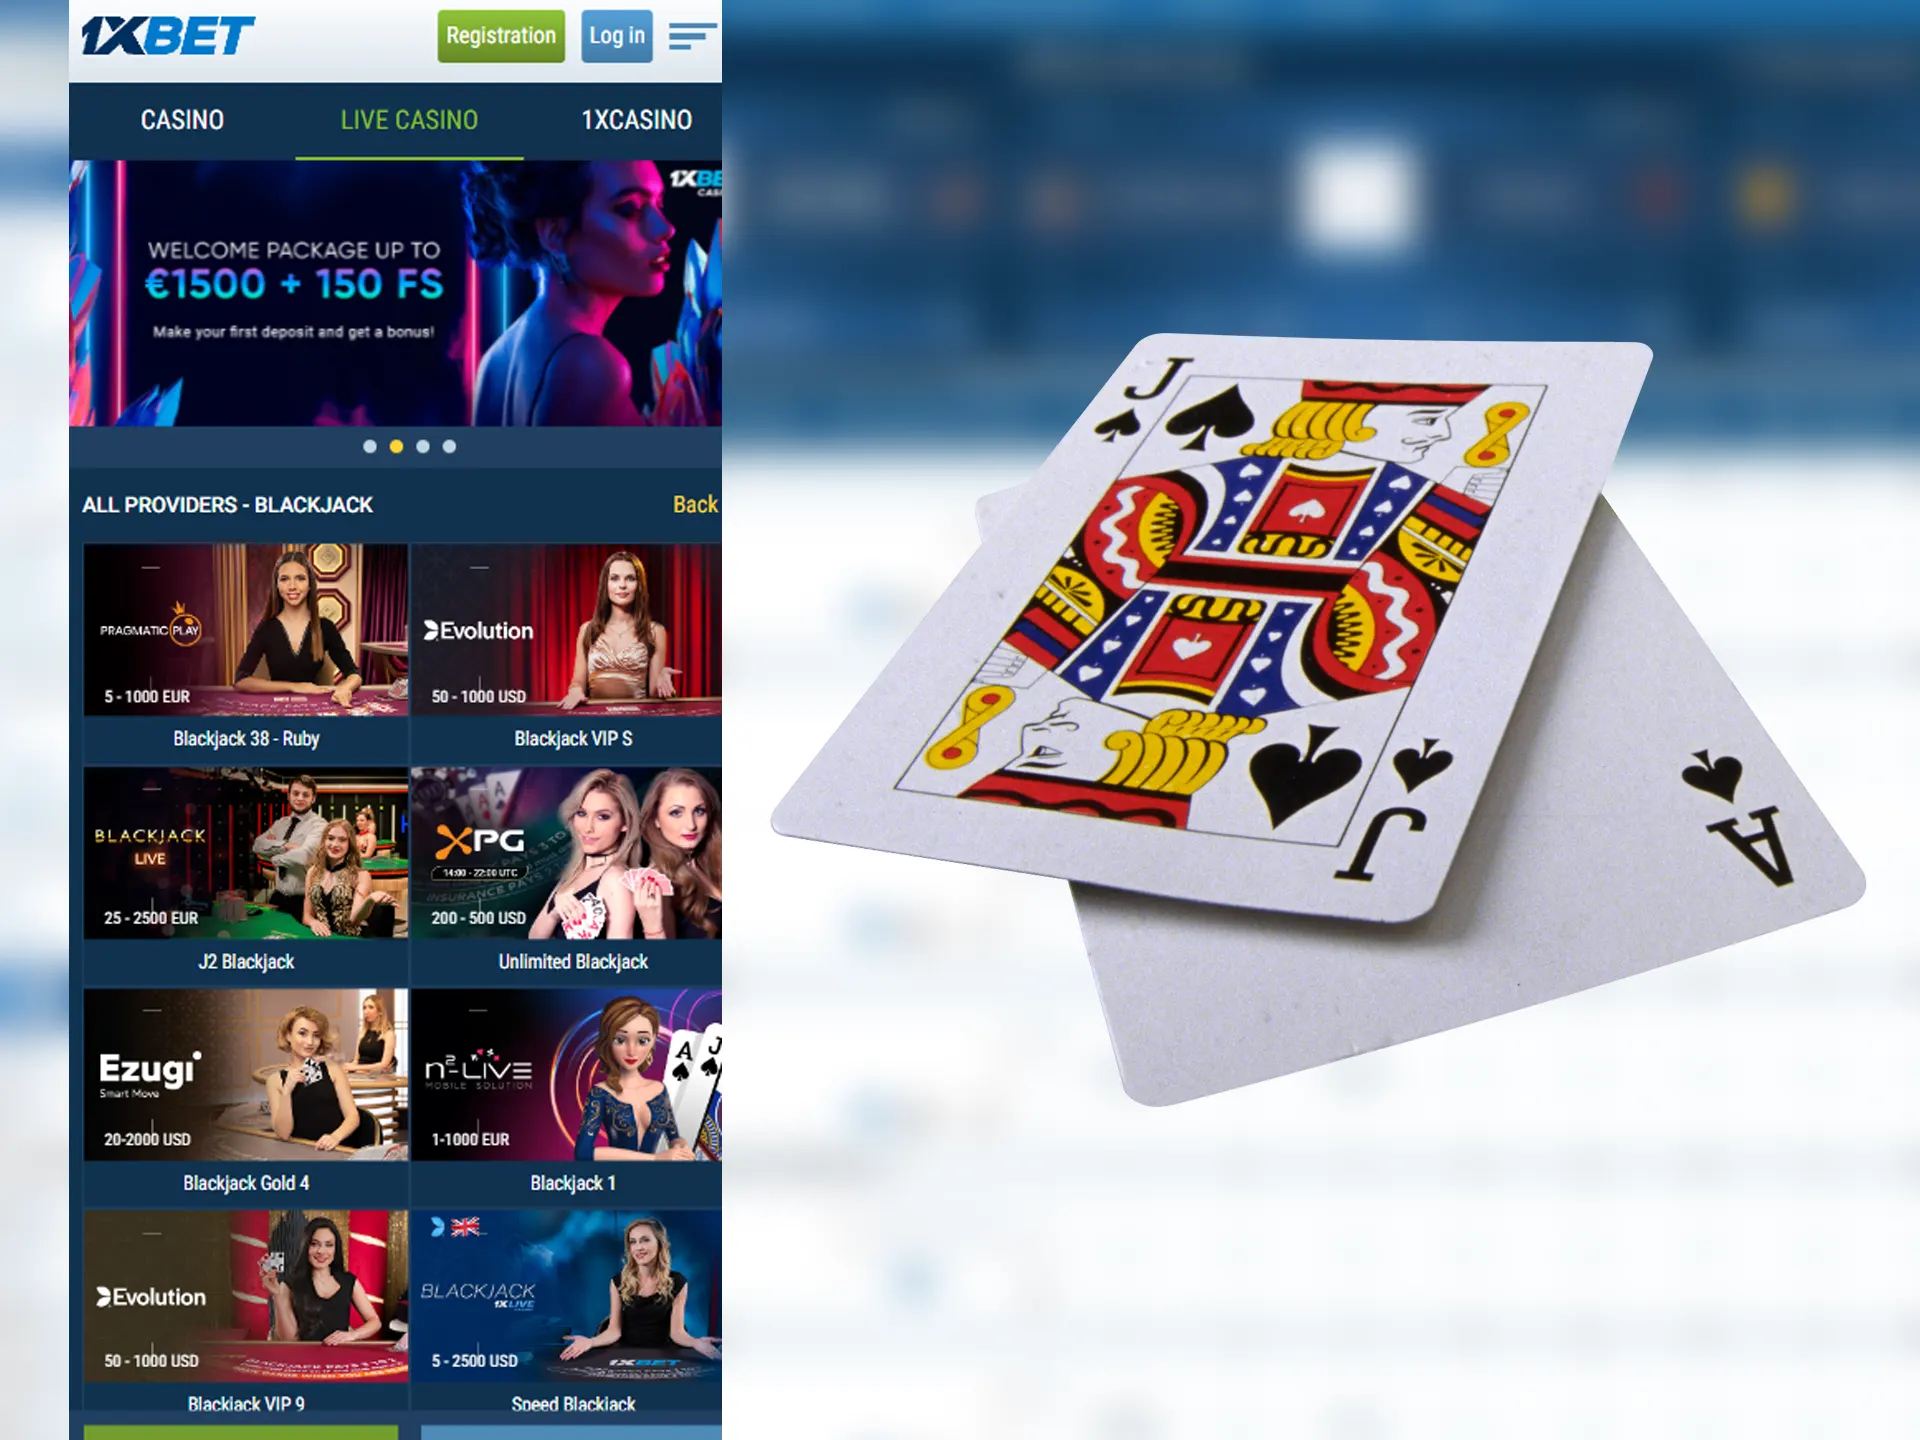 Search for blackjack tables with live dealers.